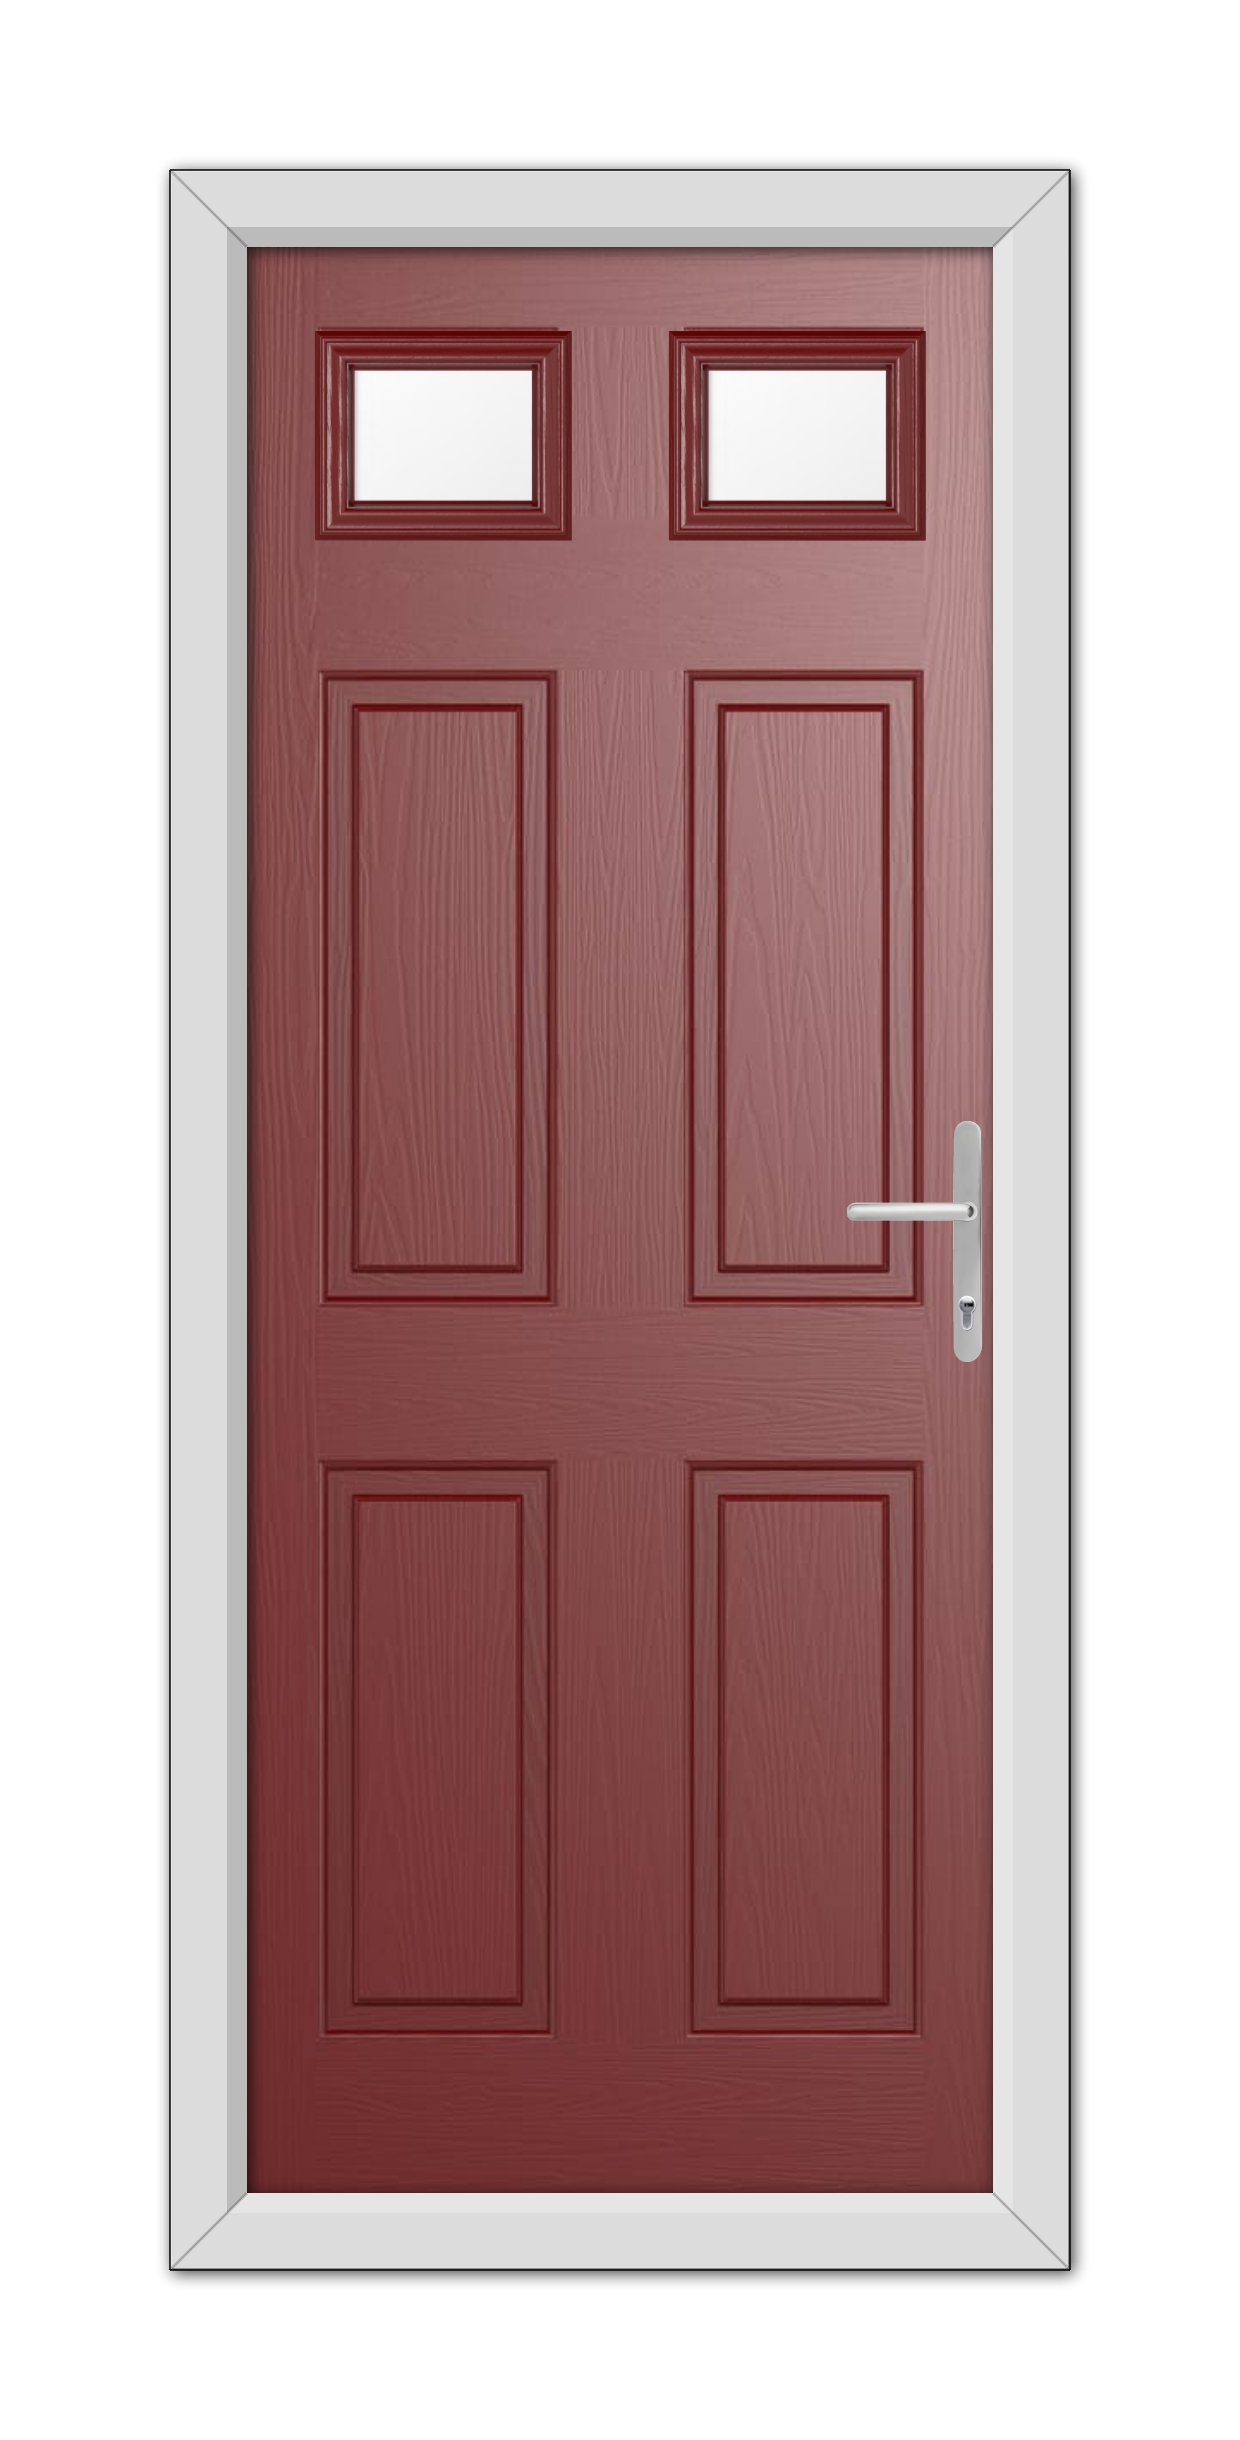 A modern Red Middleton Glazed 2 Composite Door 48mm Timber Core with a white frame, featuring three panels and two small rectangular windows at the top.